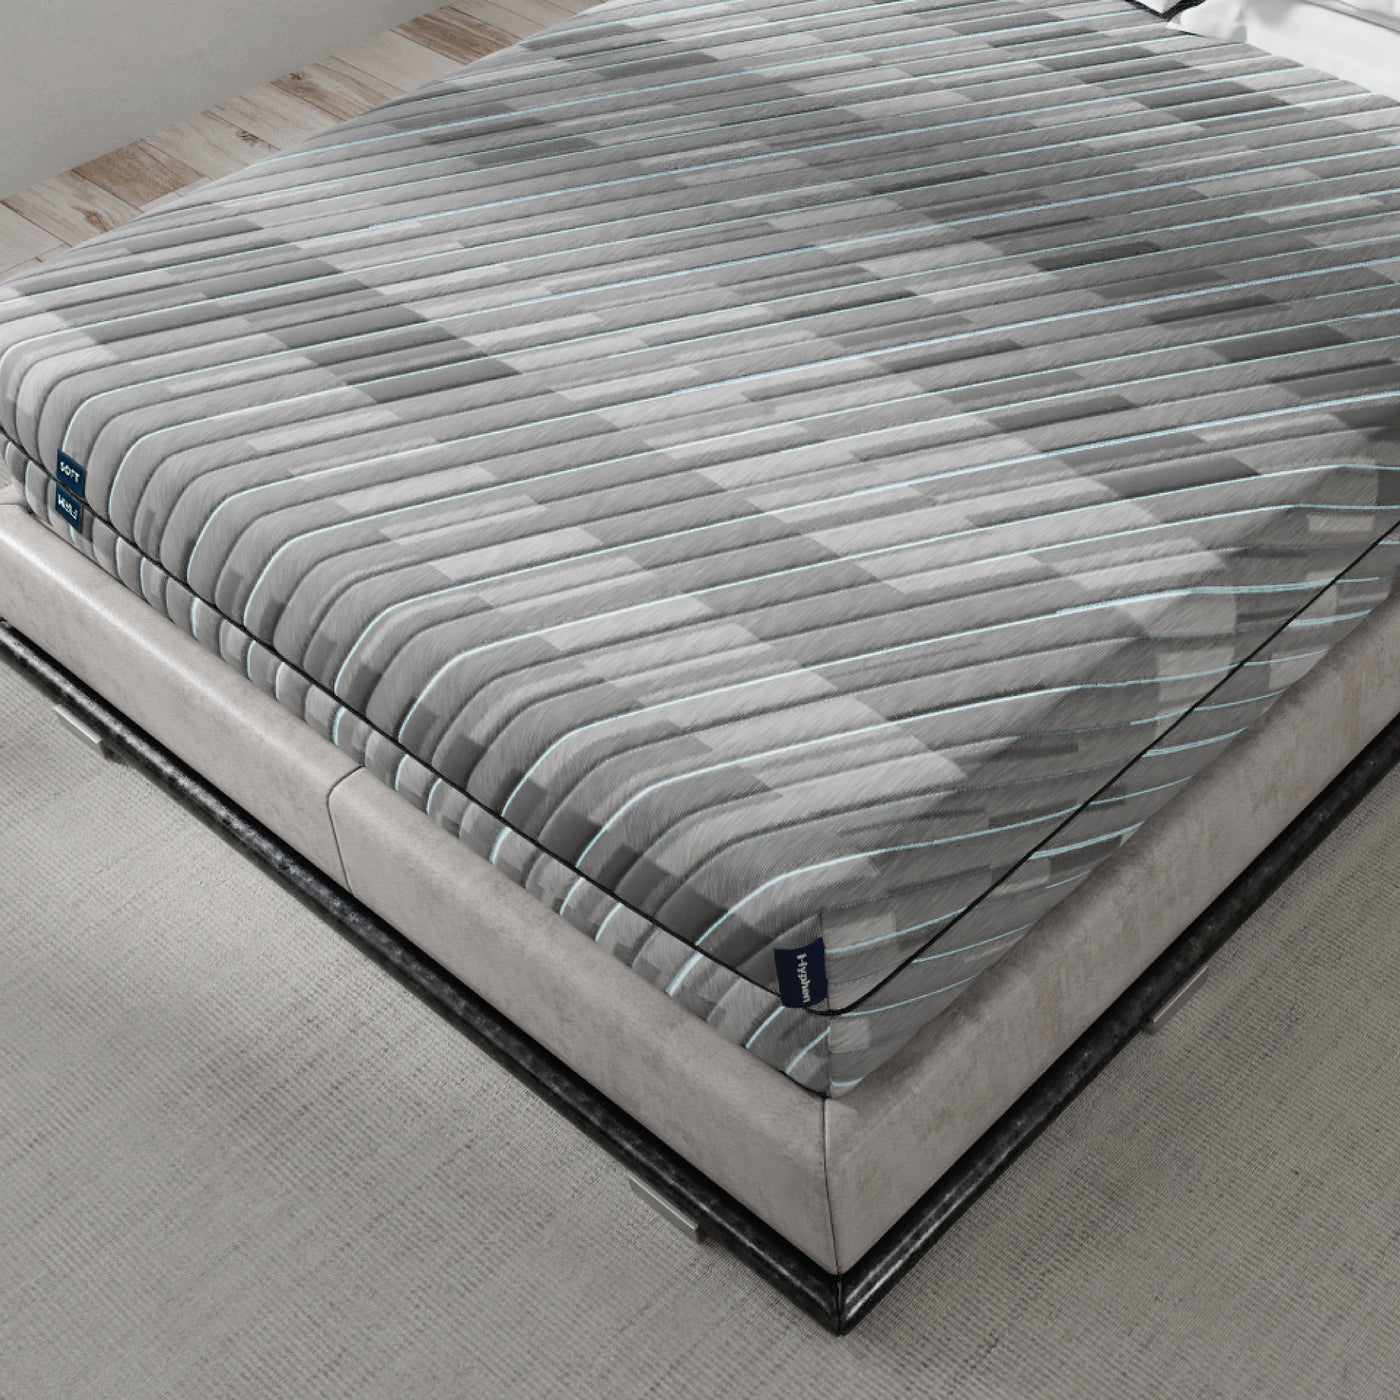 Above view of double sided mattress with grey cooling cover.